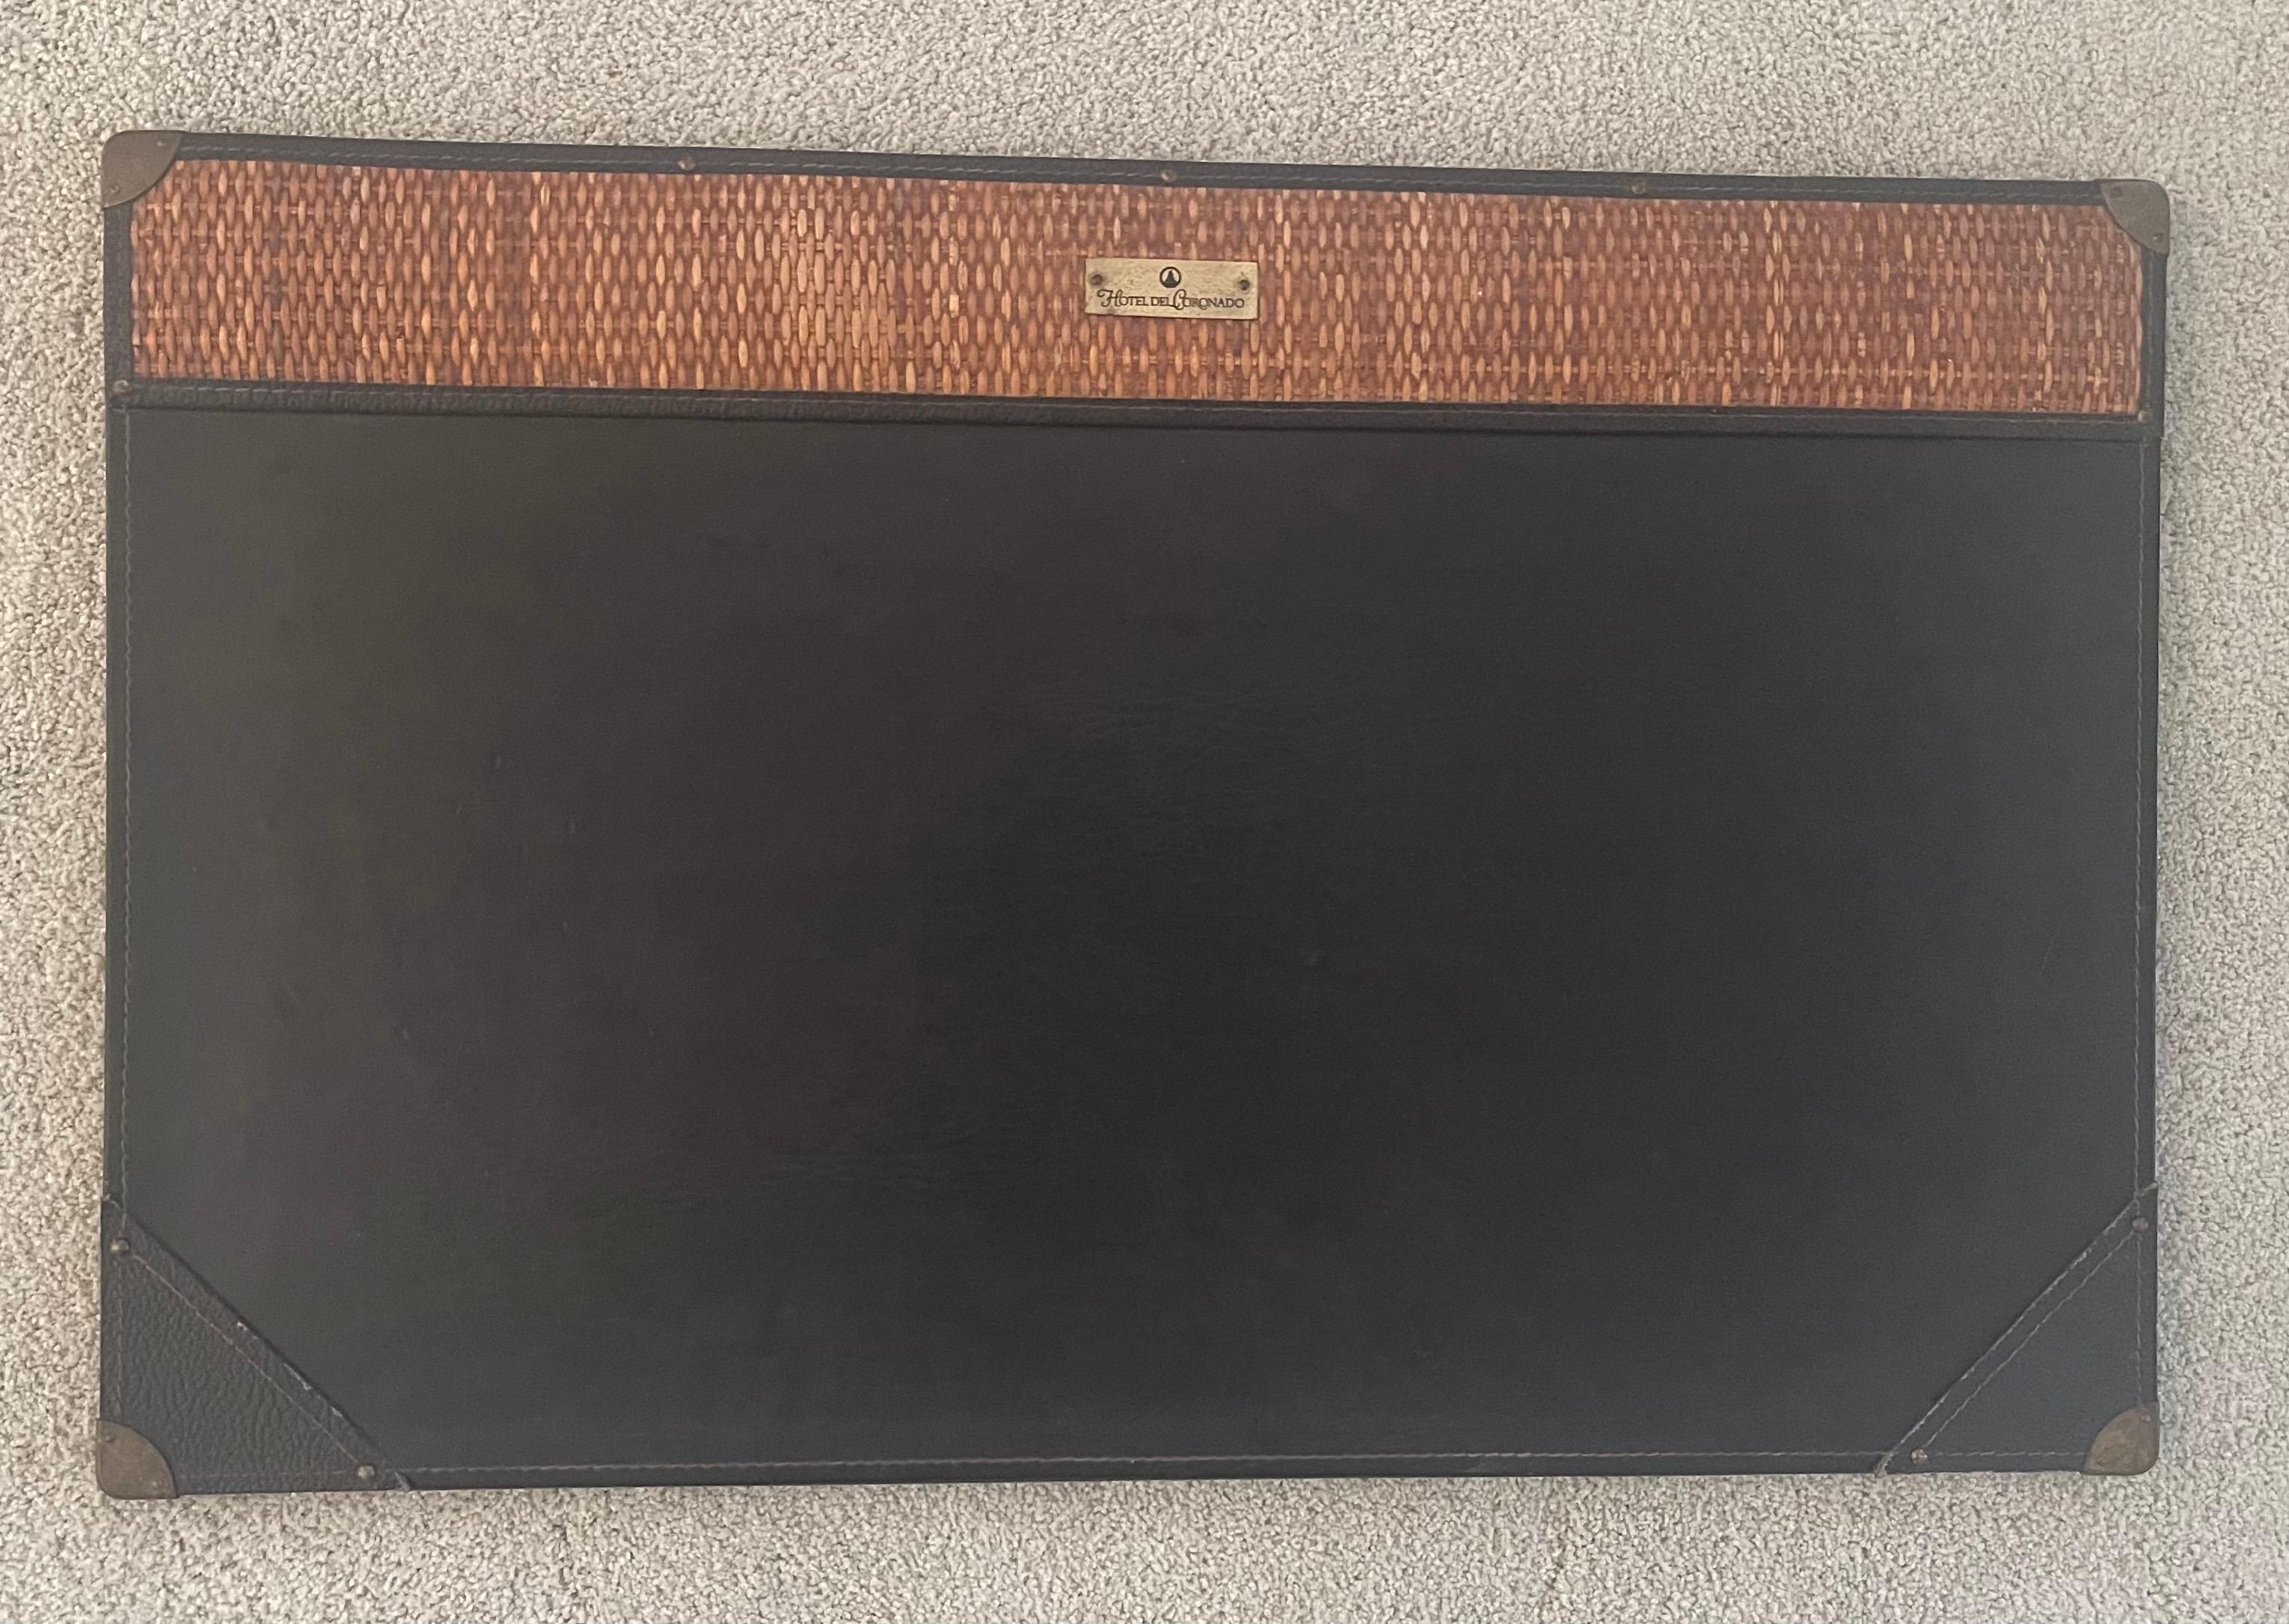 Vintage Hotel del Coronado (San Diego, CA Landmark Hotel) leather and cane desk blotter, circa 1970s. The piece is quite rare and unique and was used in the hotel in the 1970s and 1980s. The piece is in very good condition, measures 28